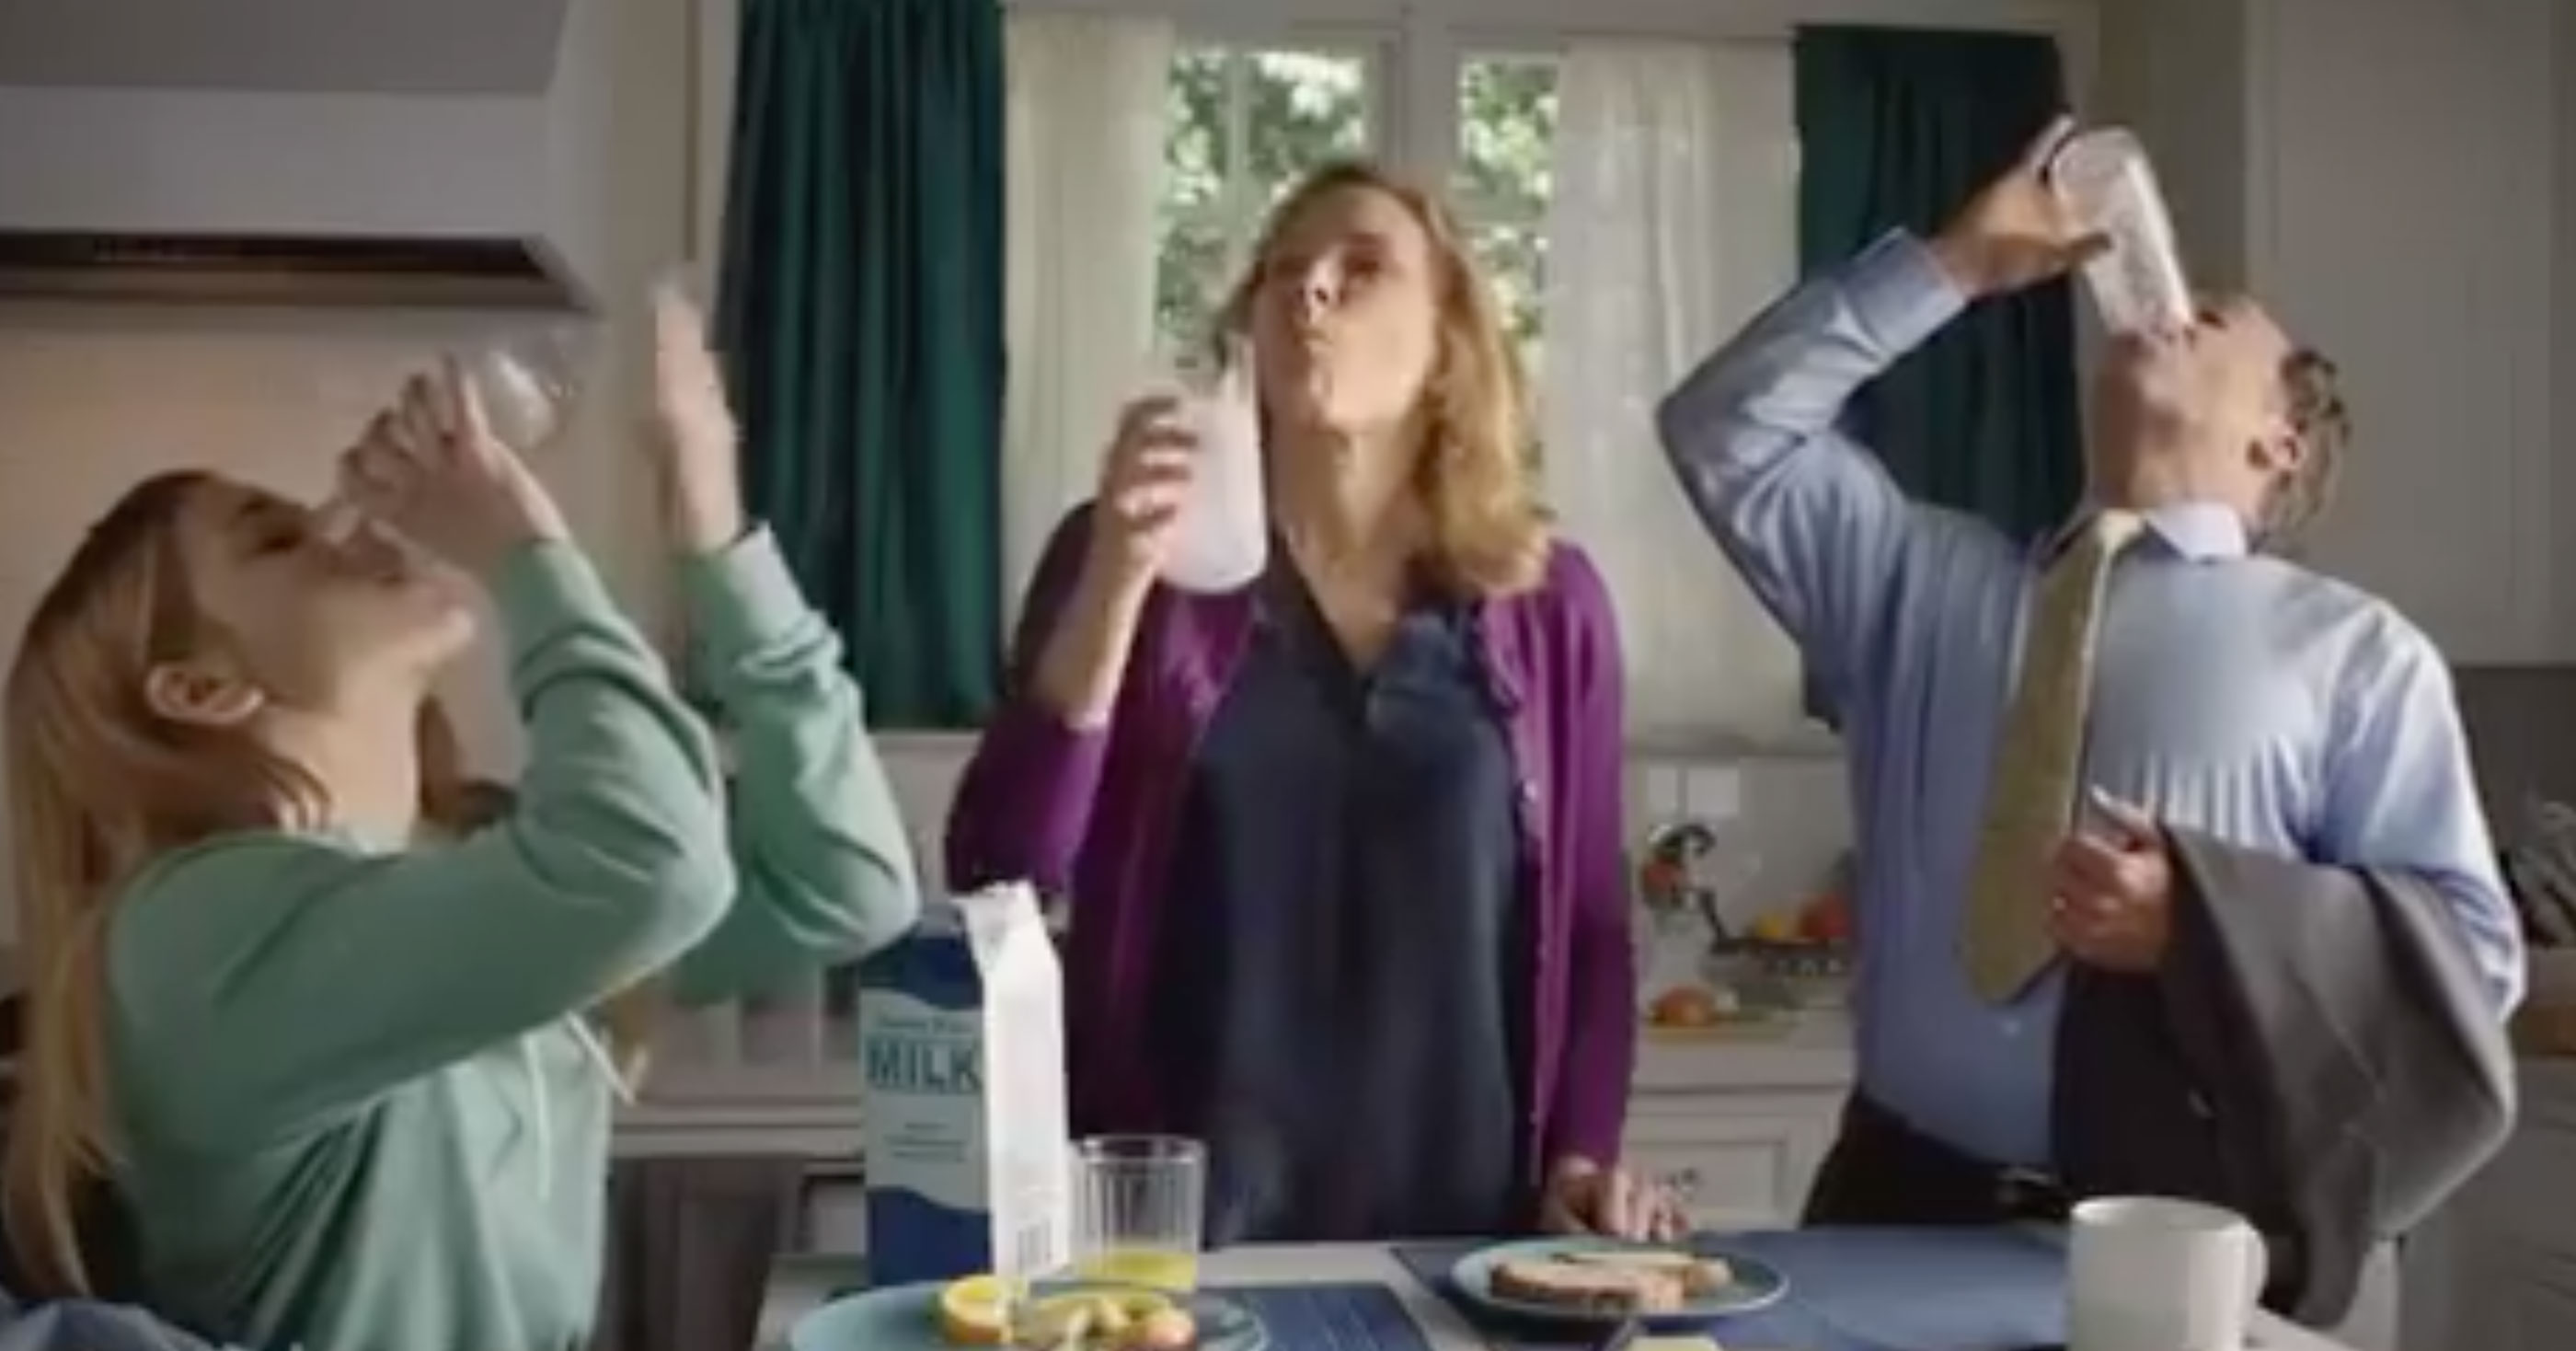 This ‘Chunky Milk’ Super Bowl Commercial Will Make You Want To Gag (WATCH)